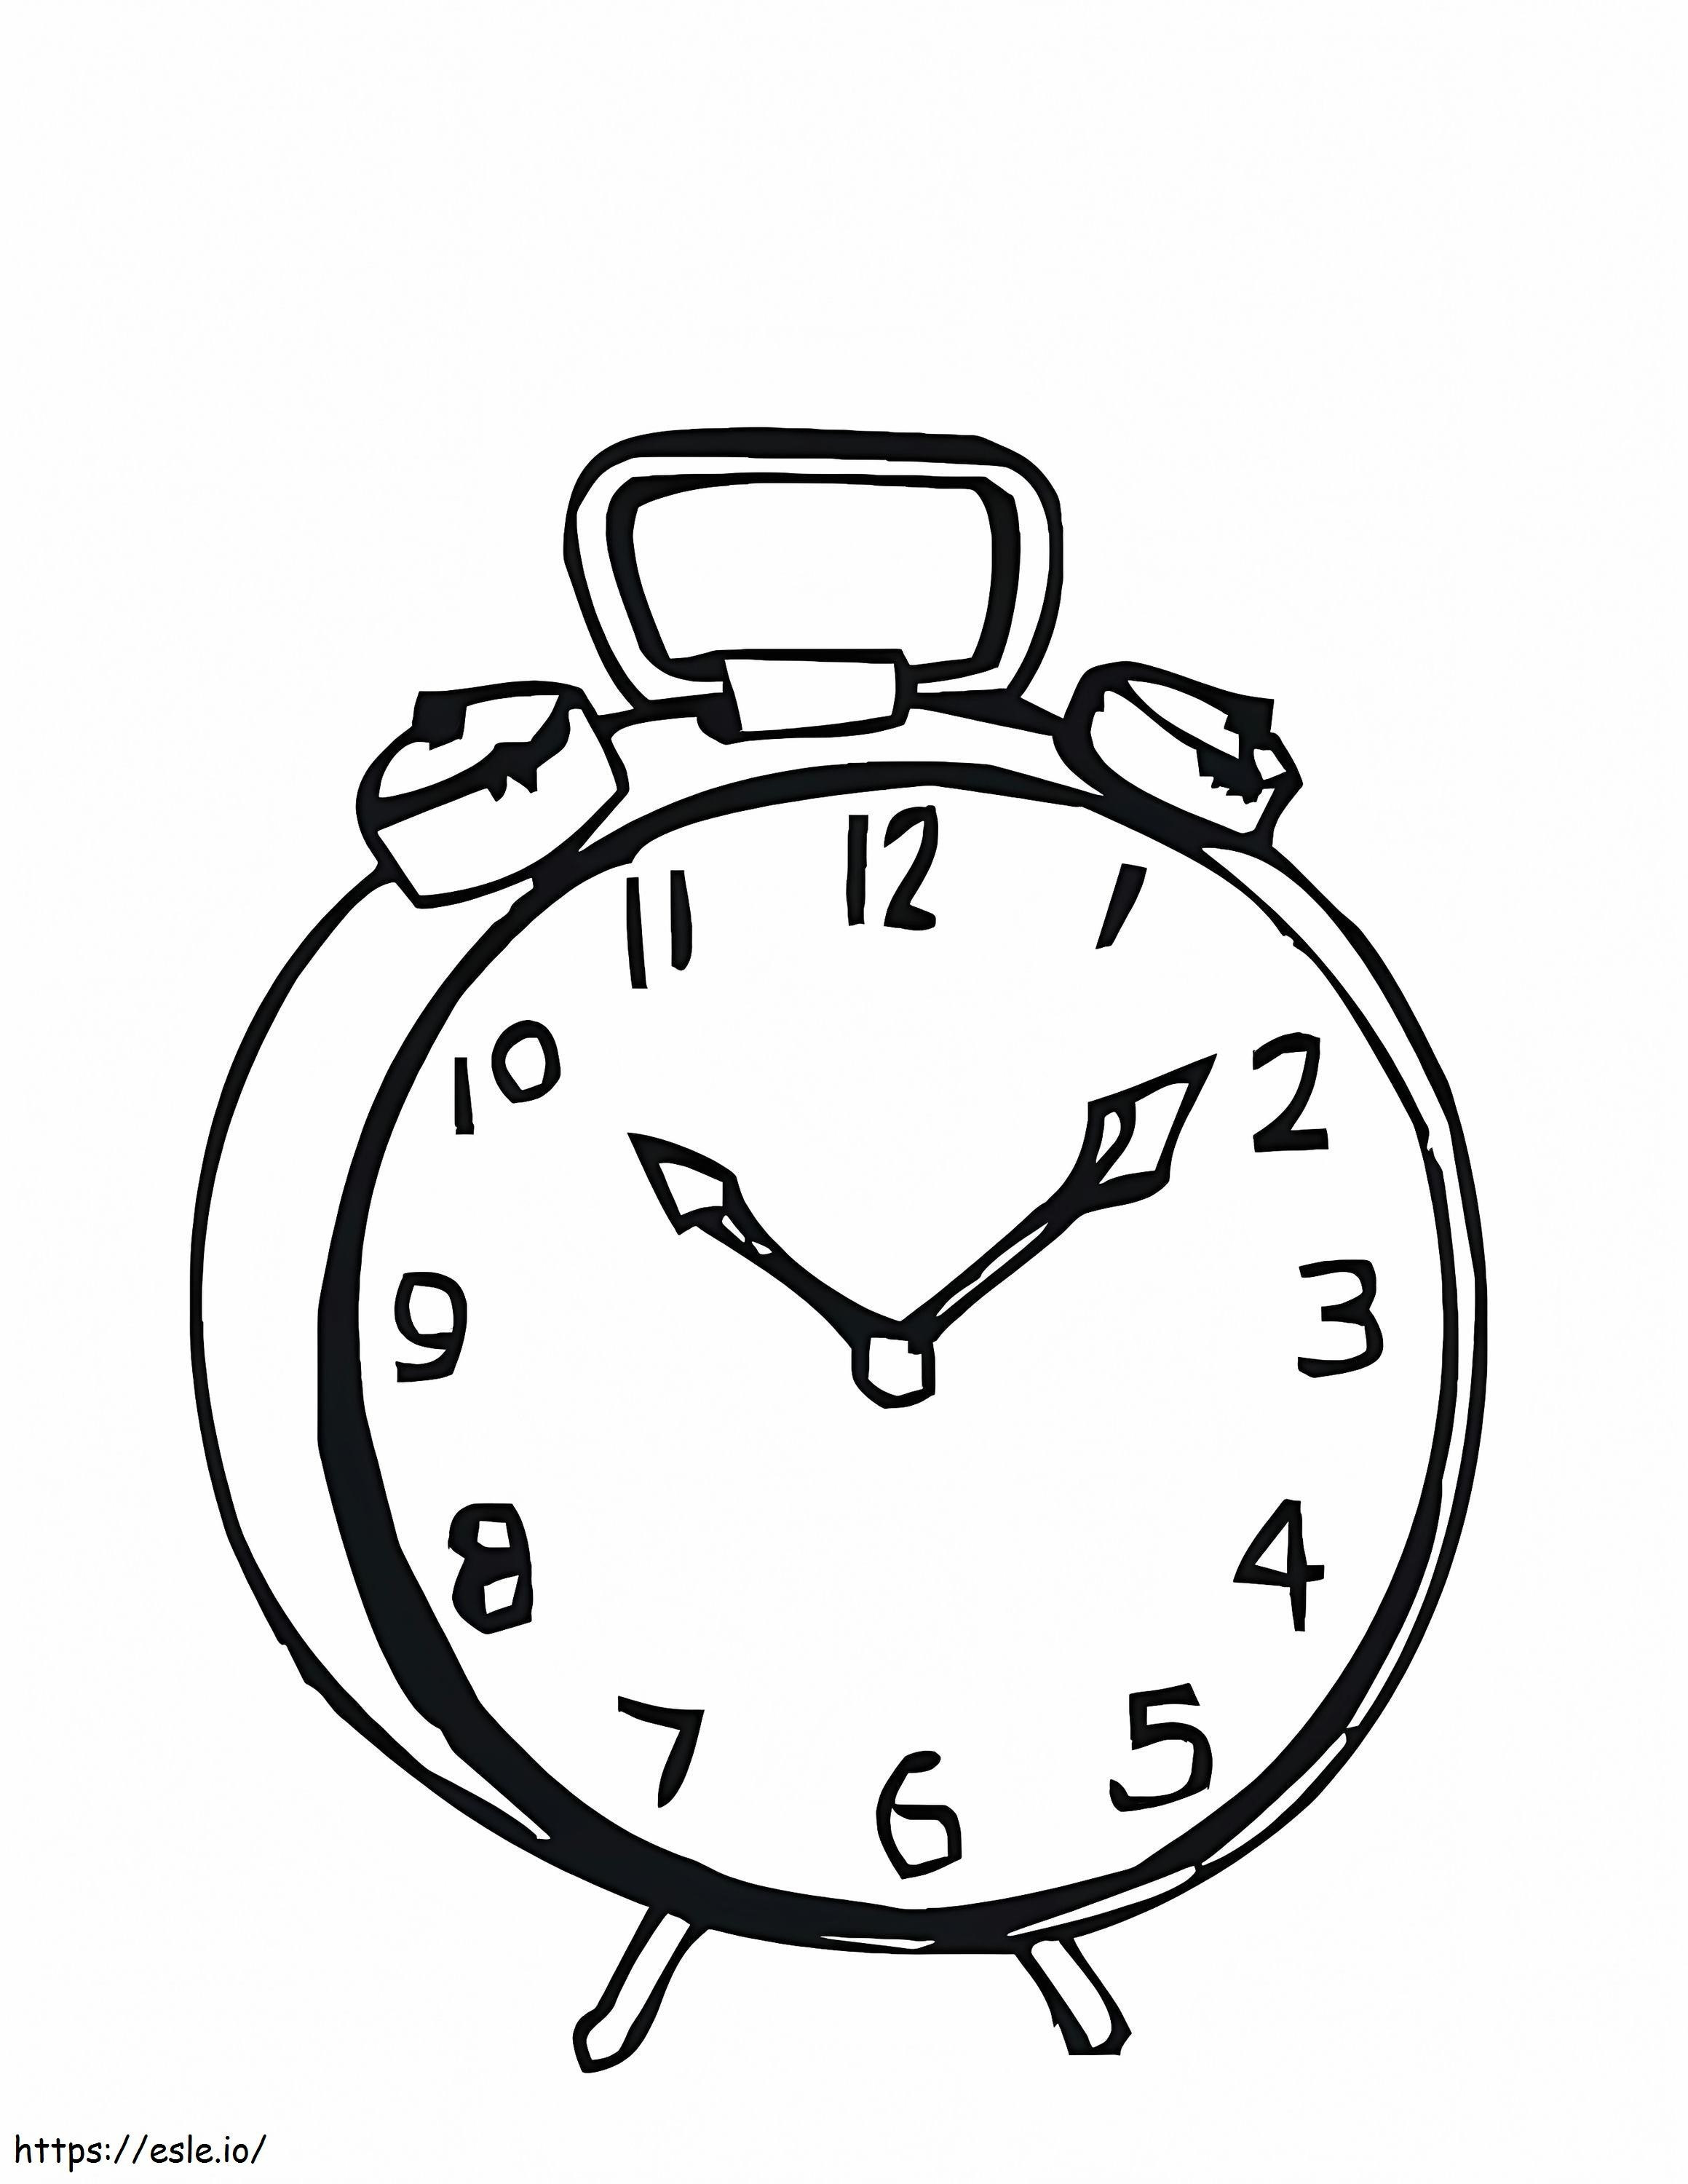 Clock 4 coloring page